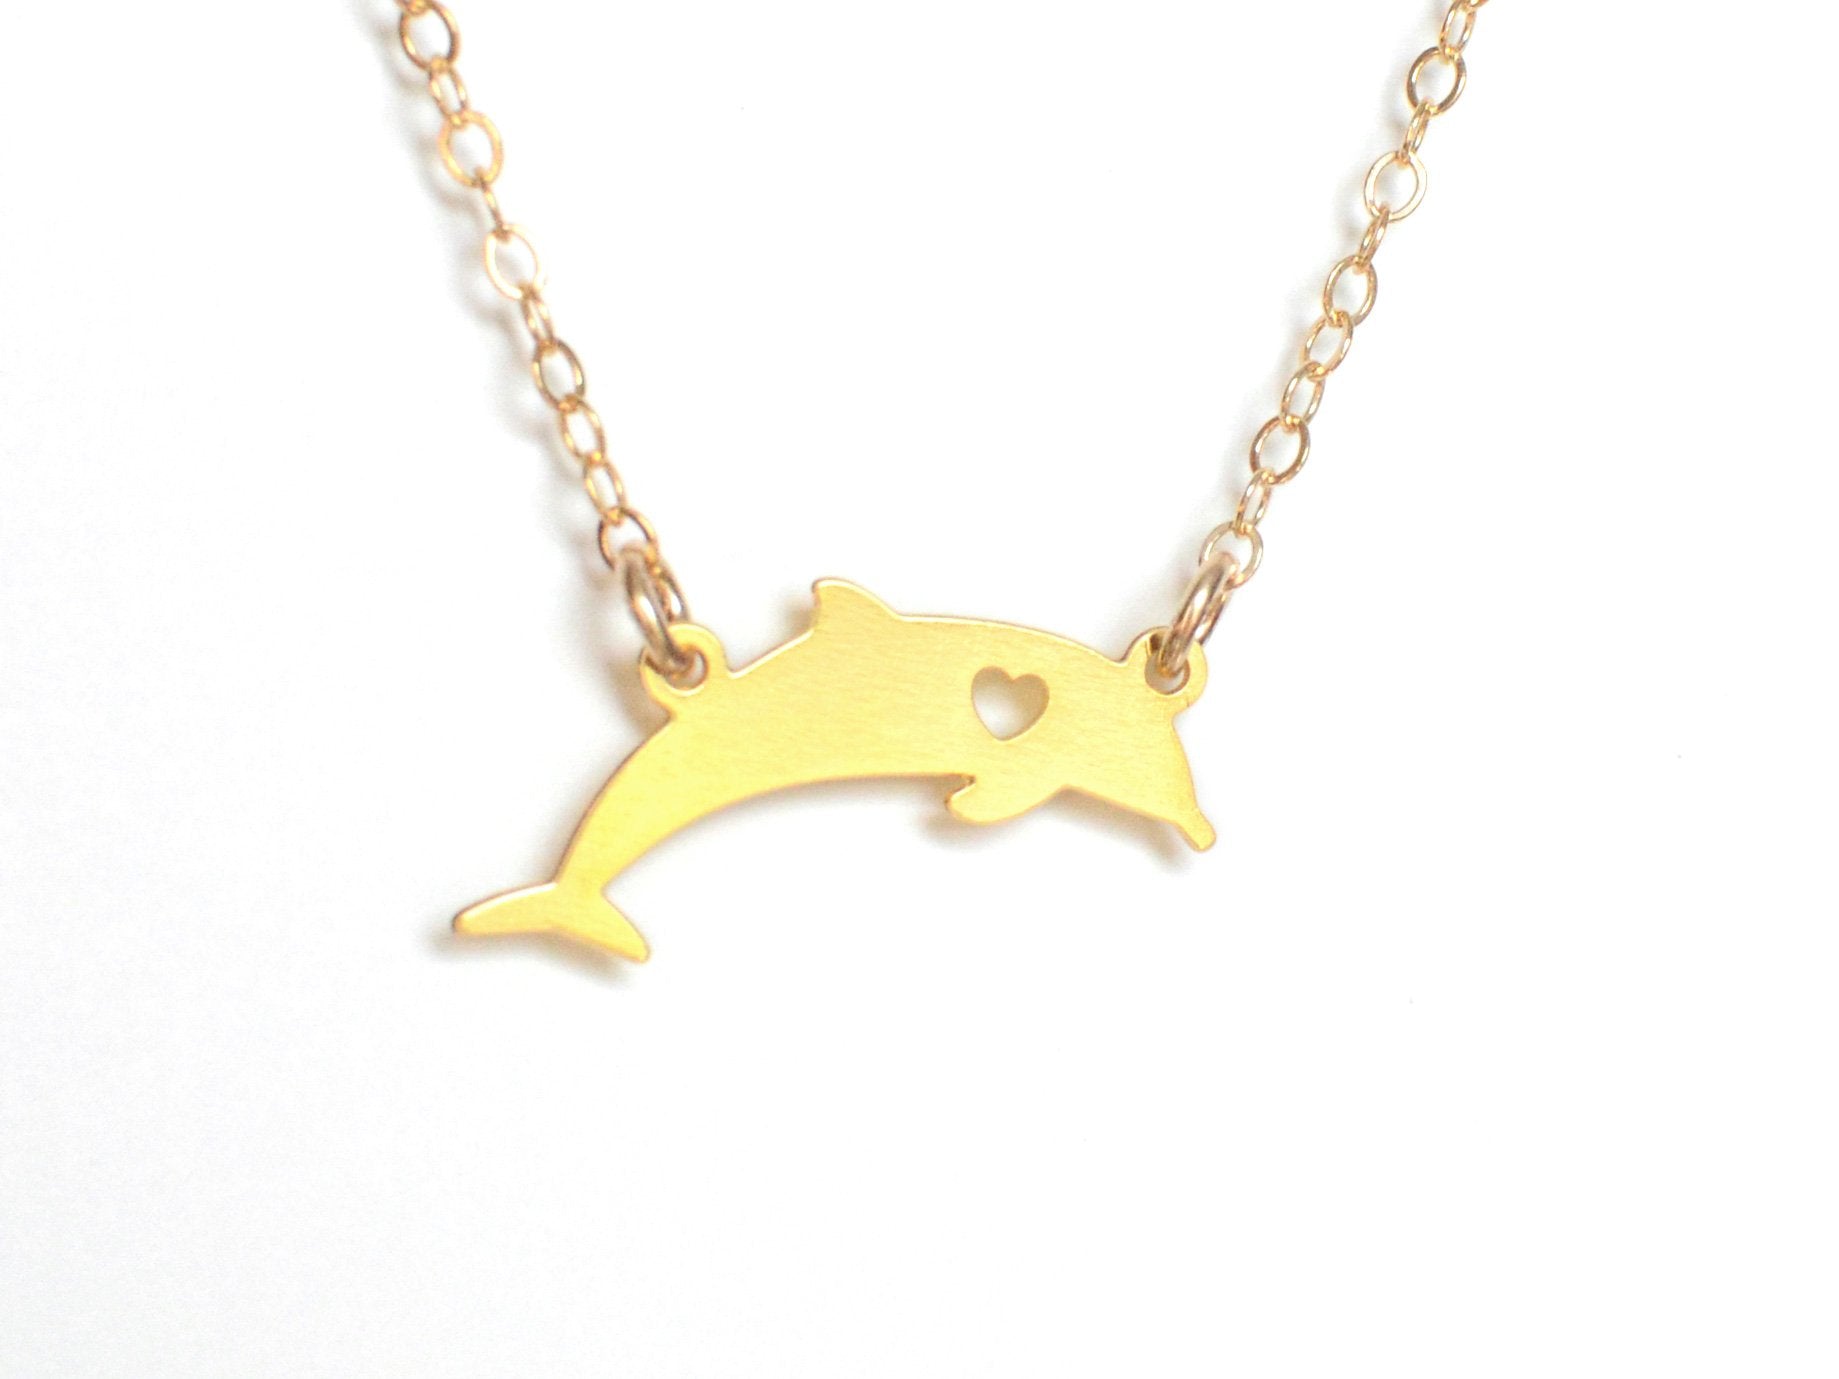 Dolphin Love Necklace - Animal Love - High Quality, Affordable Necklace - Available in Gold and Silver - Made in USA - Brevity Jewelry